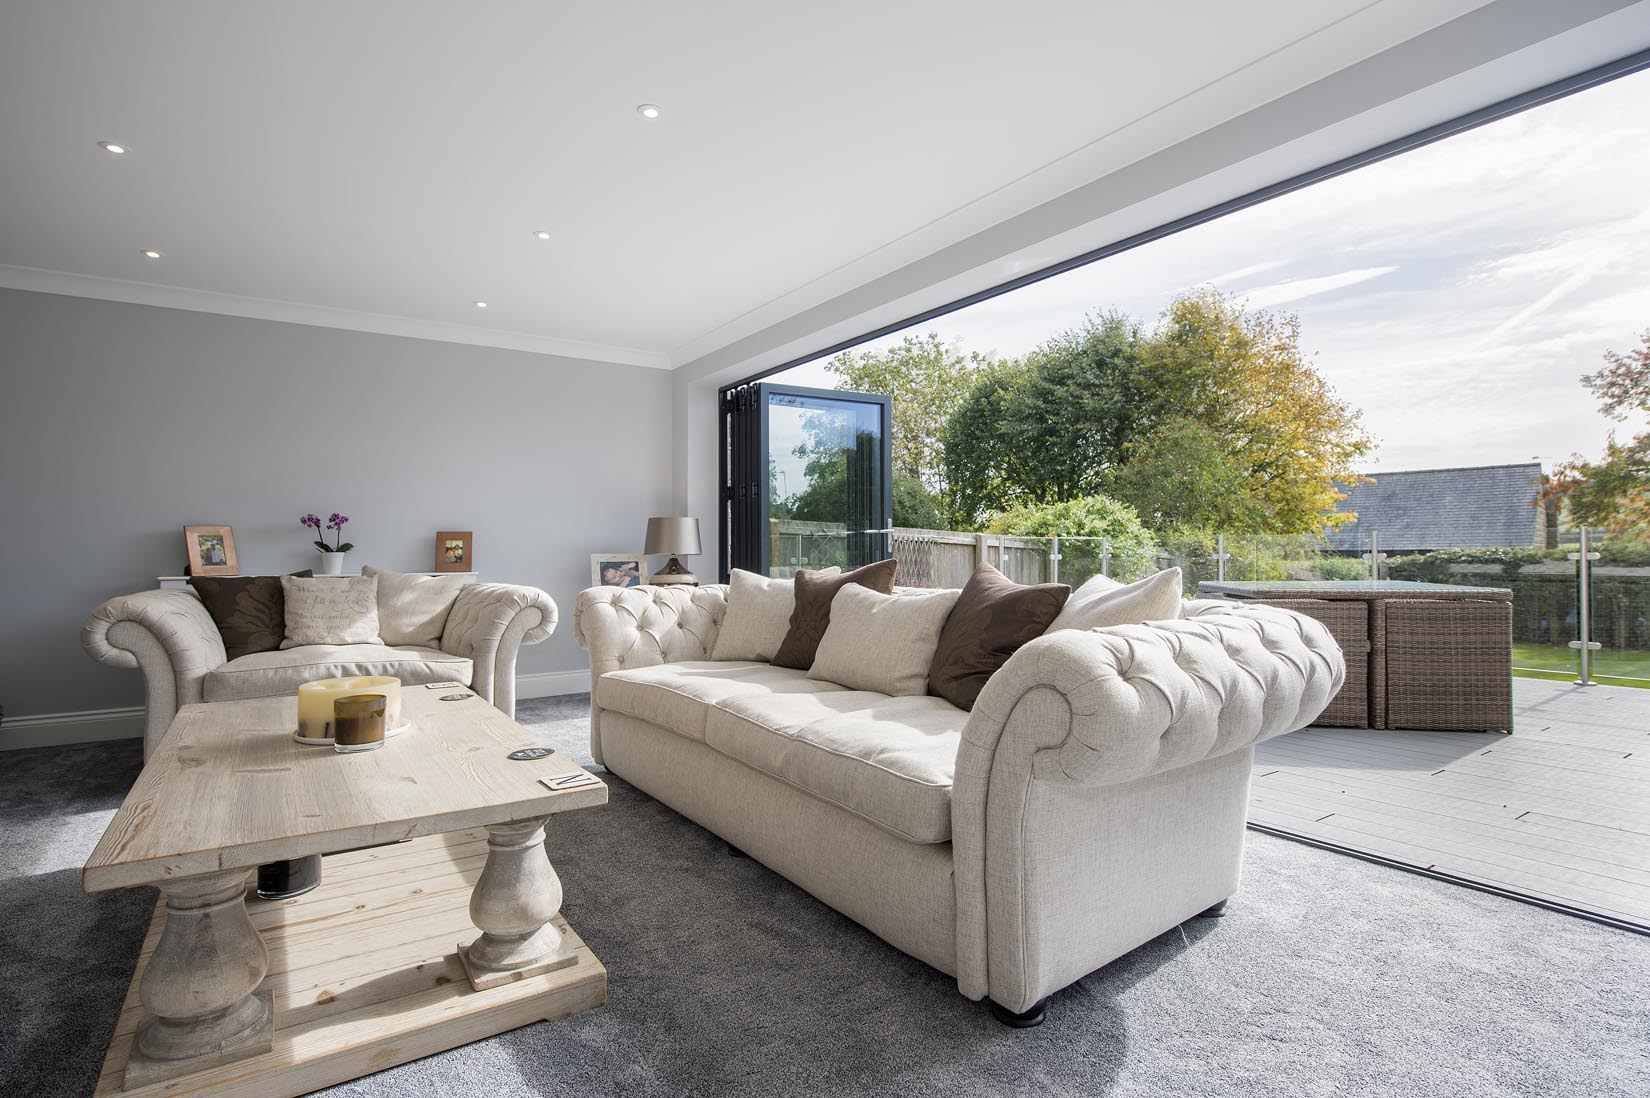 Bi-fold doors in the living room create a much lighter room